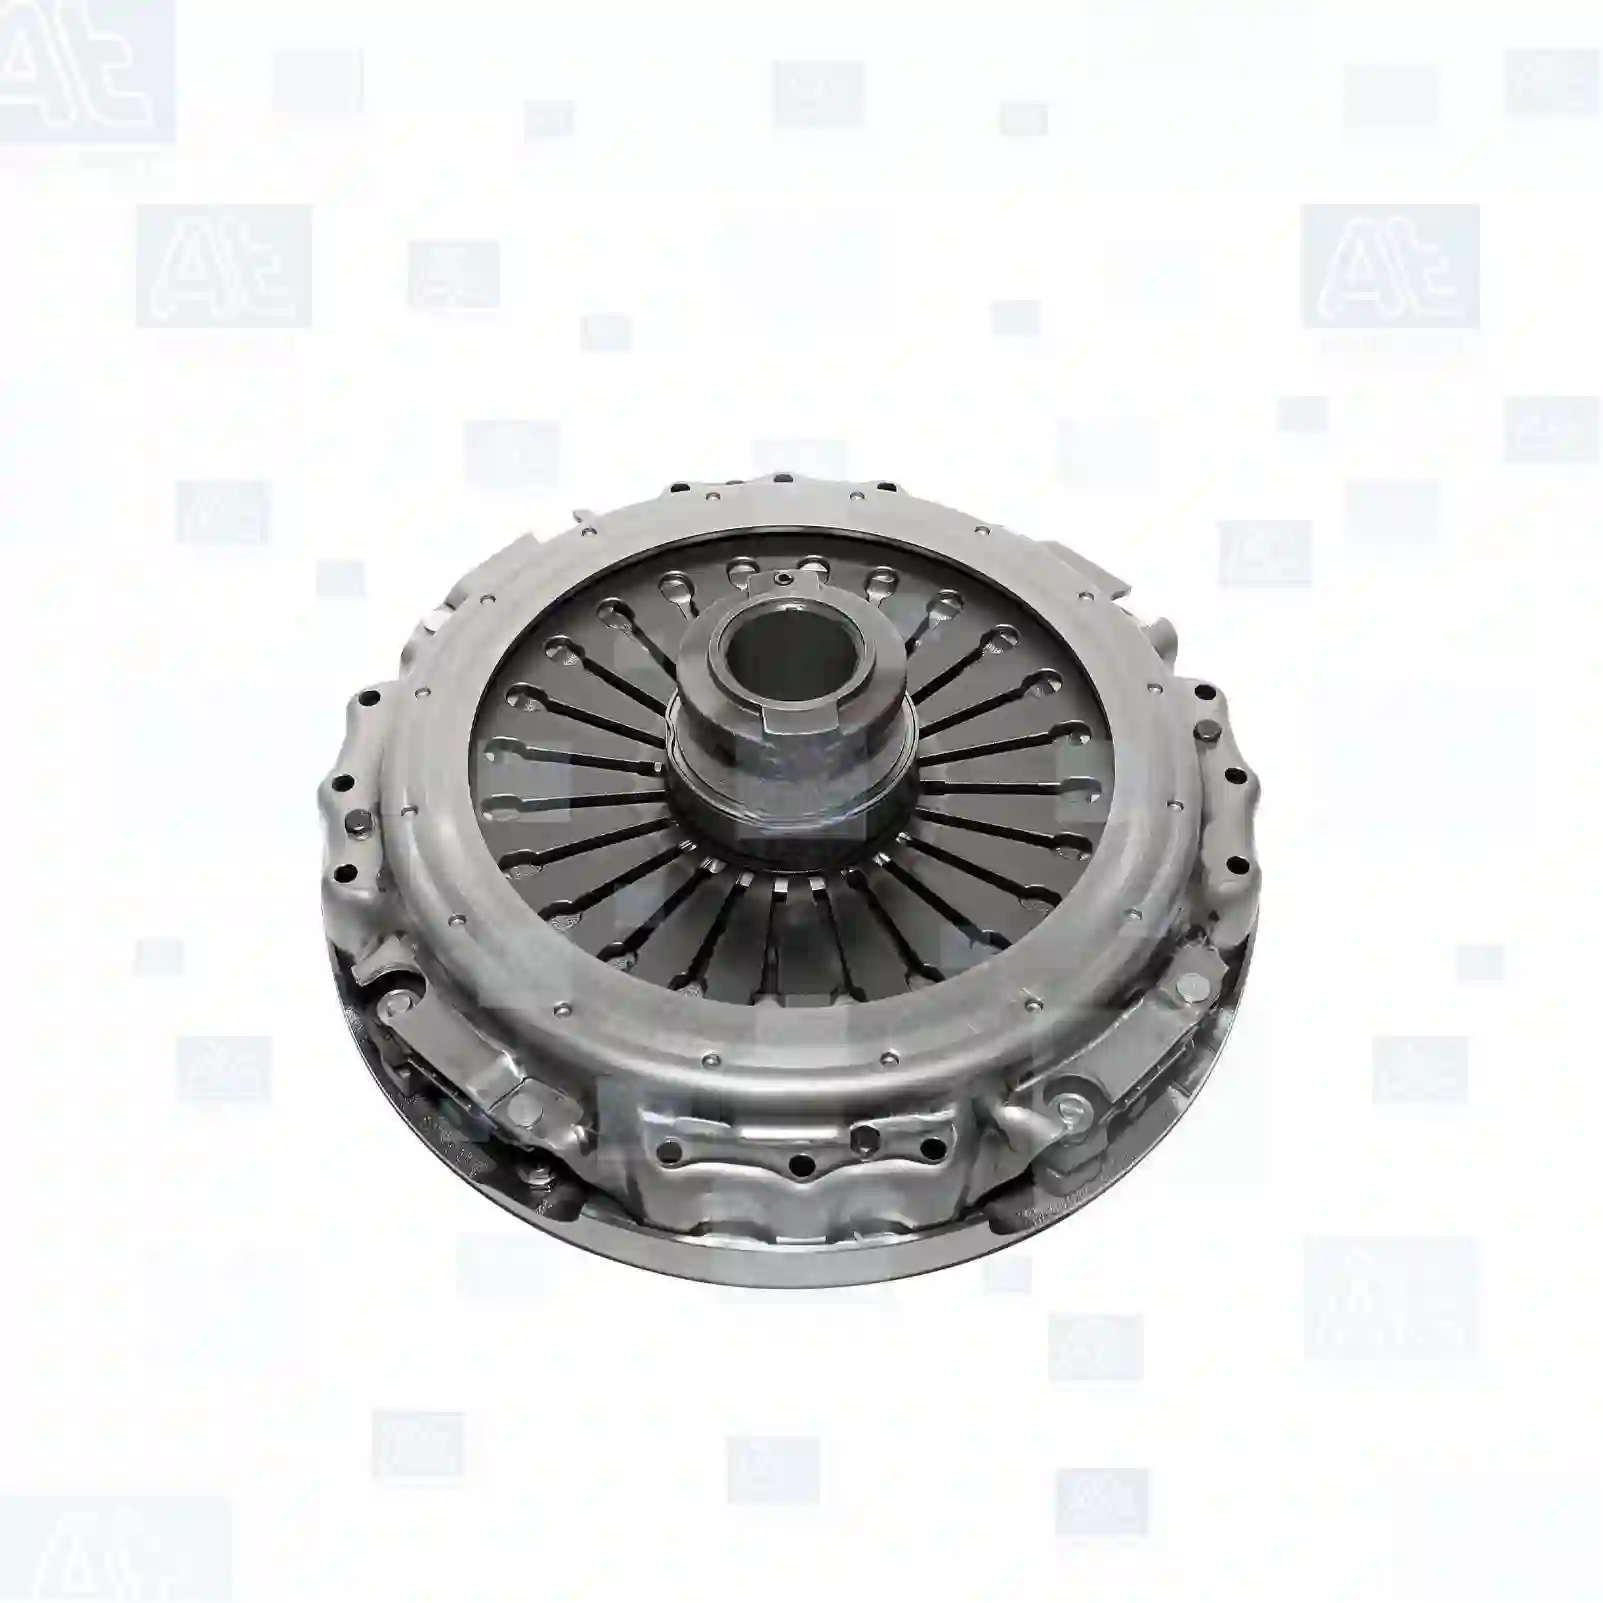 Clutch cover, with release bearing, at no 77722441, oem no: 0062504704, 0062504804, 0062504904, 0062507404, 0062508604, 0062508704, 0062508804, 0072502804, 0072502904, 0072503004, 0072503204, 0072503304, 0072503404, 0072503504, 0072504404, 0072504704, 0072505104, 007250510480, 0072508204, 0082501004, 0082501304, 0082501904, 0082503504, 0082503604, 0082503804, 0082503904, 0082504204, 0092500504, 0092501204, 0092501404, 0092501504, 0092501604, 0092502304, 0092502504, 0092508504, 0102501304, 0102501504, 0102501704, 0192501304 At Spare Part | Engine, Accelerator Pedal, Camshaft, Connecting Rod, Crankcase, Crankshaft, Cylinder Head, Engine Suspension Mountings, Exhaust Manifold, Exhaust Gas Recirculation, Filter Kits, Flywheel Housing, General Overhaul Kits, Engine, Intake Manifold, Oil Cleaner, Oil Cooler, Oil Filter, Oil Pump, Oil Sump, Piston & Liner, Sensor & Switch, Timing Case, Turbocharger, Cooling System, Belt Tensioner, Coolant Filter, Coolant Pipe, Corrosion Prevention Agent, Drive, Expansion Tank, Fan, Intercooler, Monitors & Gauges, Radiator, Thermostat, V-Belt / Timing belt, Water Pump, Fuel System, Electronical Injector Unit, Feed Pump, Fuel Filter, cpl., Fuel Gauge Sender,  Fuel Line, Fuel Pump, Fuel Tank, Injection Line Kit, Injection Pump, Exhaust System, Clutch & Pedal, Gearbox, Propeller Shaft, Axles, Brake System, Hubs & Wheels, Suspension, Leaf Spring, Universal Parts / Accessories, Steering, Electrical System, Cabin Clutch cover, with release bearing, at no 77722441, oem no: 0062504704, 0062504804, 0062504904, 0062507404, 0062508604, 0062508704, 0062508804, 0072502804, 0072502904, 0072503004, 0072503204, 0072503304, 0072503404, 0072503504, 0072504404, 0072504704, 0072505104, 007250510480, 0072508204, 0082501004, 0082501304, 0082501904, 0082503504, 0082503604, 0082503804, 0082503904, 0082504204, 0092500504, 0092501204, 0092501404, 0092501504, 0092501604, 0092502304, 0092502504, 0092508504, 0102501304, 0102501504, 0102501704, 0192501304 At Spare Part | Engine, Accelerator Pedal, Camshaft, Connecting Rod, Crankcase, Crankshaft, Cylinder Head, Engine Suspension Mountings, Exhaust Manifold, Exhaust Gas Recirculation, Filter Kits, Flywheel Housing, General Overhaul Kits, Engine, Intake Manifold, Oil Cleaner, Oil Cooler, Oil Filter, Oil Pump, Oil Sump, Piston & Liner, Sensor & Switch, Timing Case, Turbocharger, Cooling System, Belt Tensioner, Coolant Filter, Coolant Pipe, Corrosion Prevention Agent, Drive, Expansion Tank, Fan, Intercooler, Monitors & Gauges, Radiator, Thermostat, V-Belt / Timing belt, Water Pump, Fuel System, Electronical Injector Unit, Feed Pump, Fuel Filter, cpl., Fuel Gauge Sender,  Fuel Line, Fuel Pump, Fuel Tank, Injection Line Kit, Injection Pump, Exhaust System, Clutch & Pedal, Gearbox, Propeller Shaft, Axles, Brake System, Hubs & Wheels, Suspension, Leaf Spring, Universal Parts / Accessories, Steering, Electrical System, Cabin